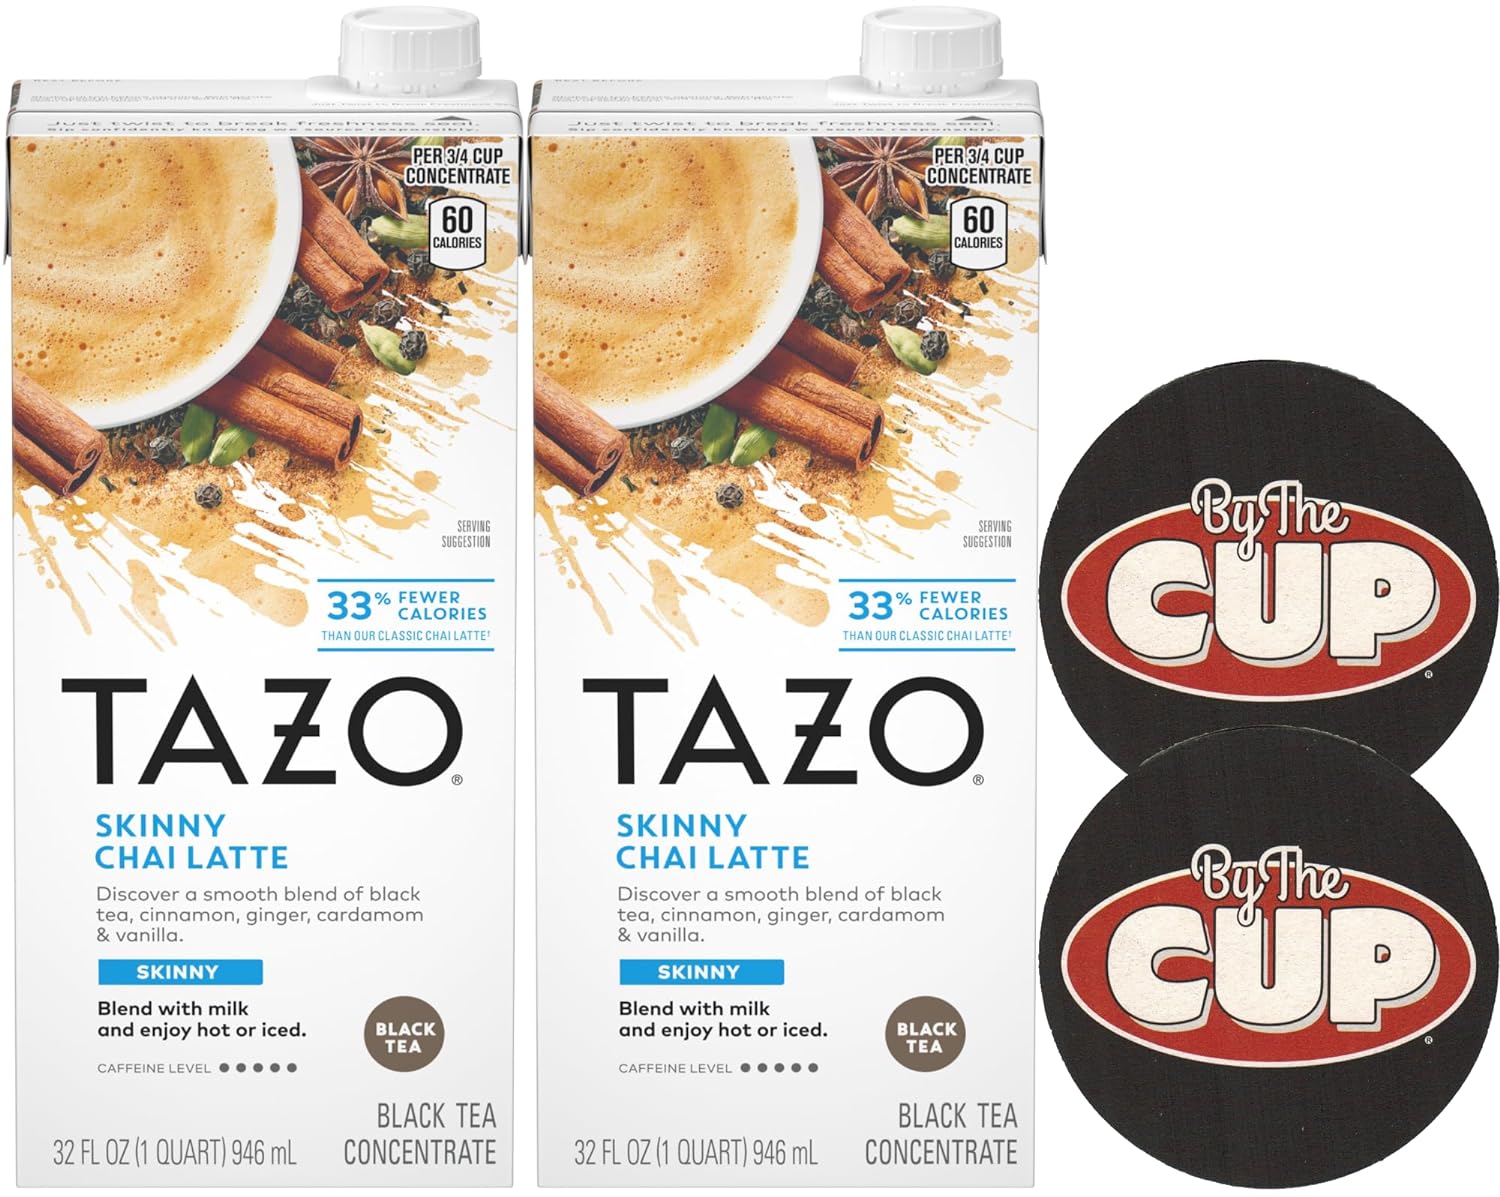 TAZO Skinny Chai Latte Black Tea Concentrate, 32 oz (Pack of 2) with By The Cup Coasters